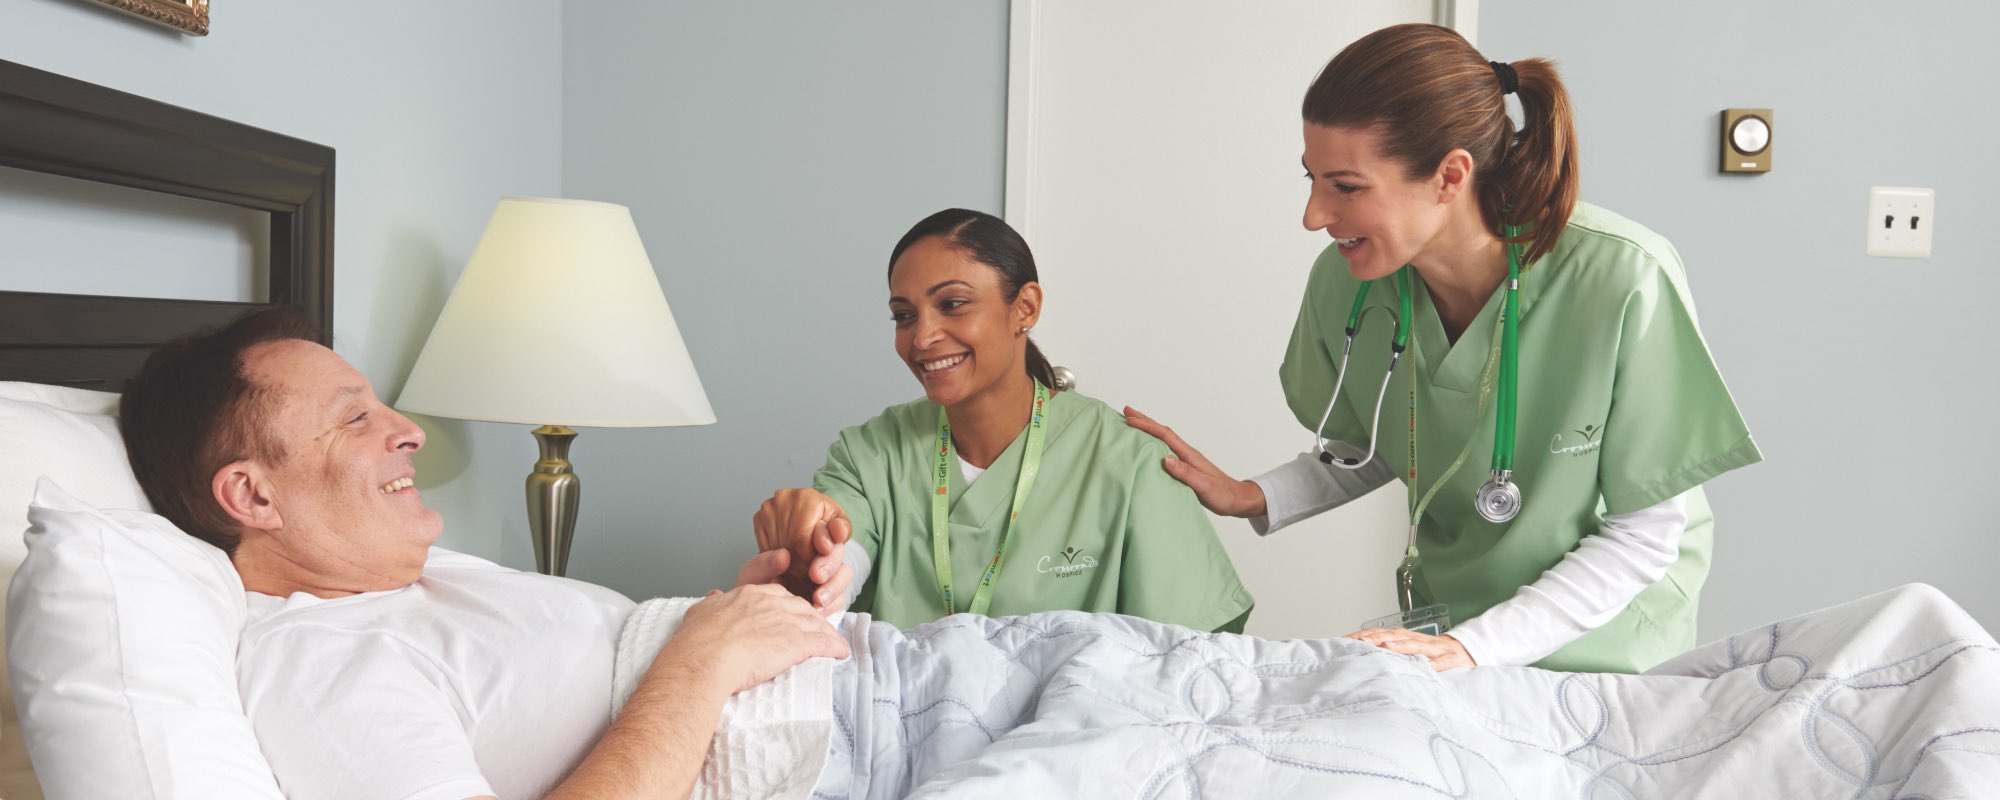 Two nurses at a patient’s bedside smiling